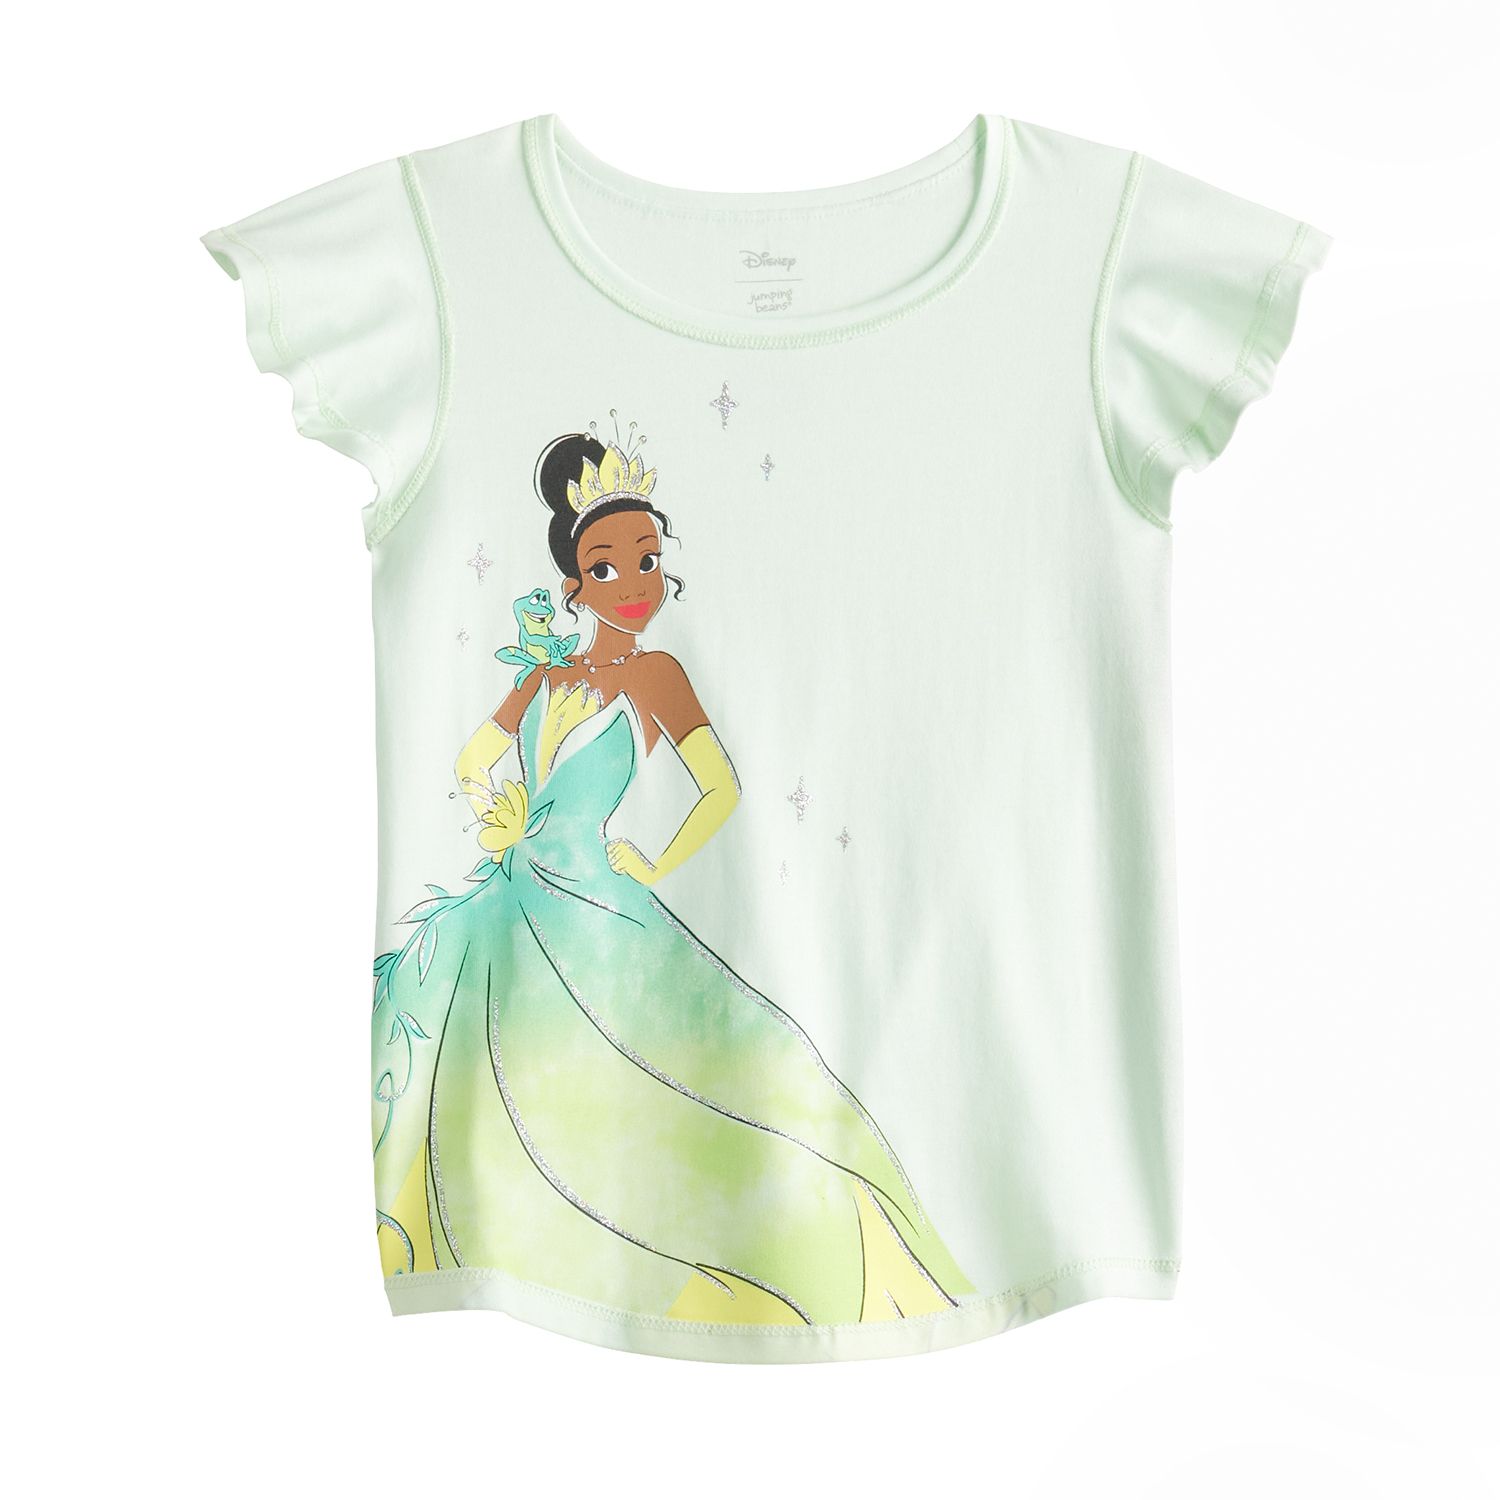 Image for Disney/Jumping Beans Disney's Tiana Toddler Girl Sensory Adaptive Graphic Tee by Jumping Beans® at Kohl's.